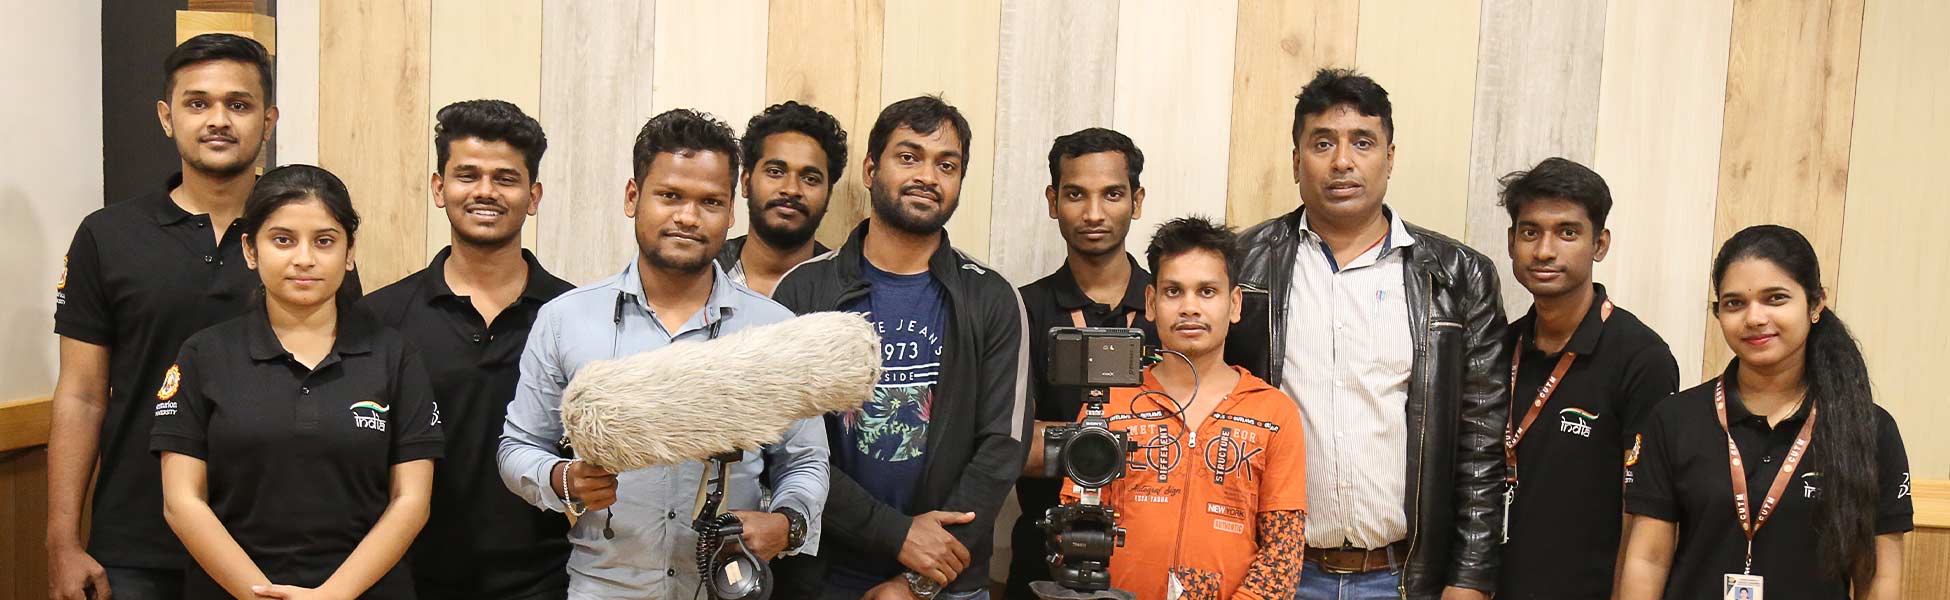 corporate film production services in india, corporate film production services in sonipat, corporate video production services in india, corporate video production services in sonipat, corporate production services in india, corporate production services in sonipat